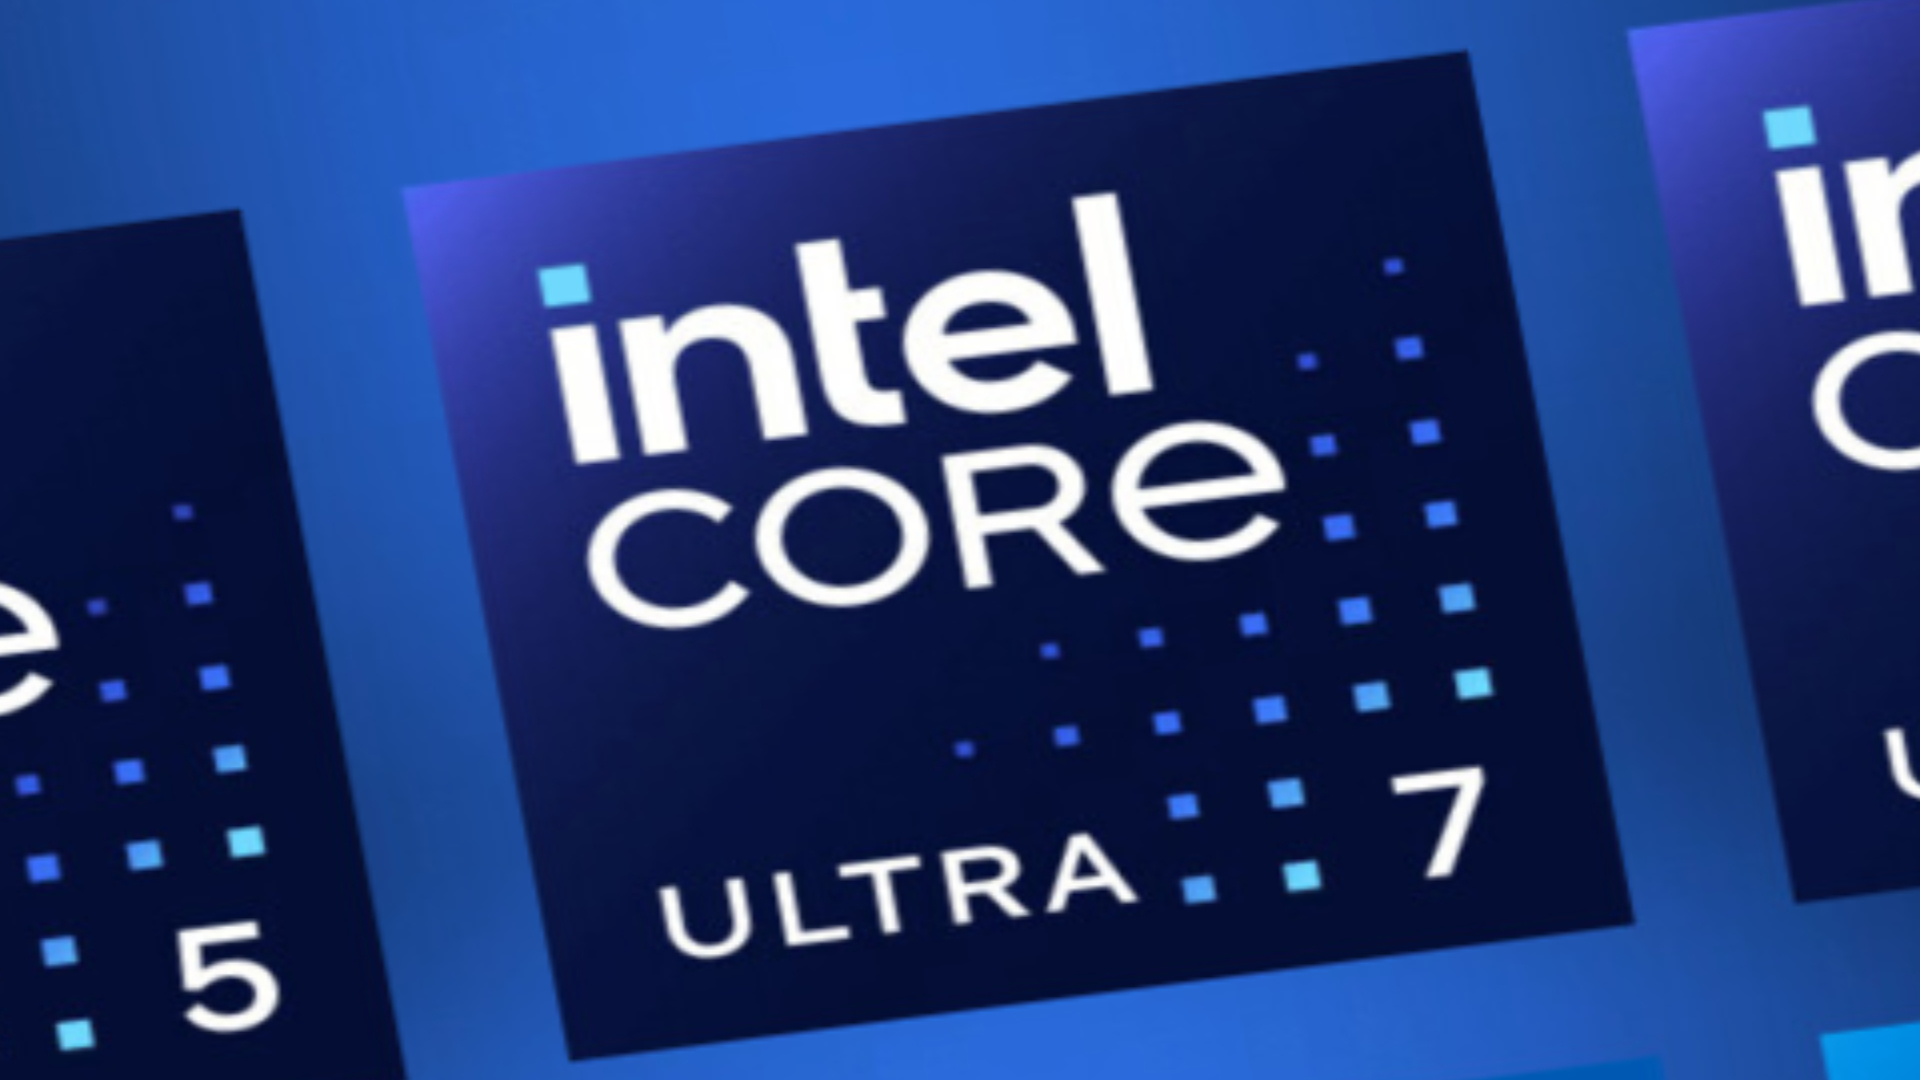 Intel i series is dead, say hello to Intel Ultra